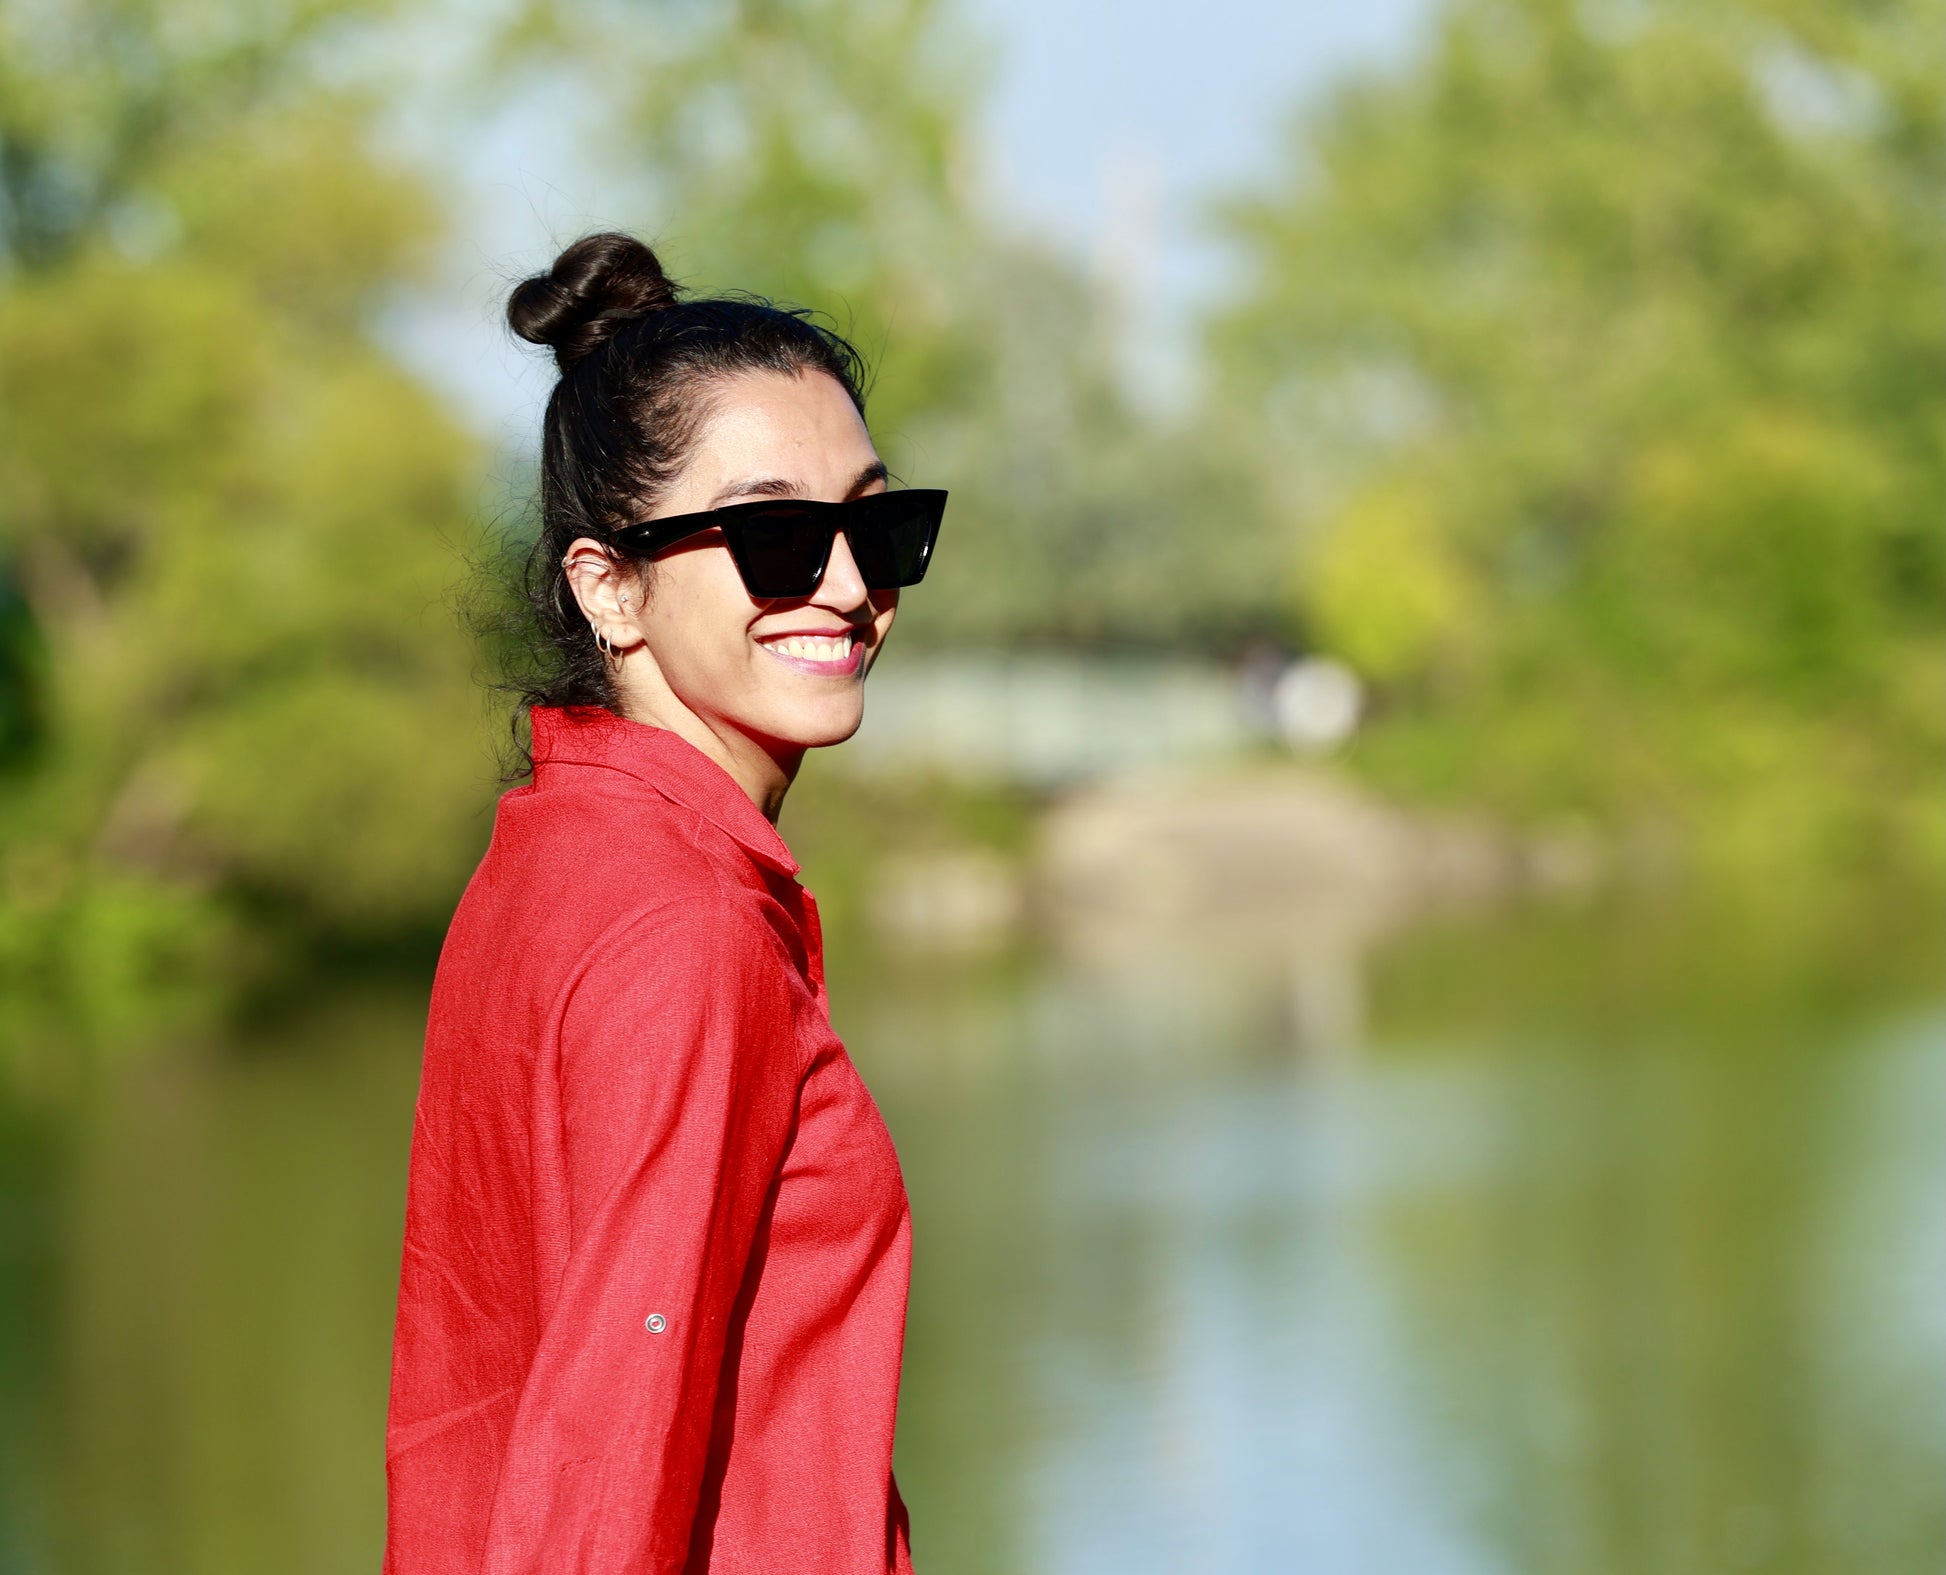 Sanaz is rocking an ELZI Red Linen Blouse with snaps and adjustable sleeves. Photograph : Jonathan Brunelle.